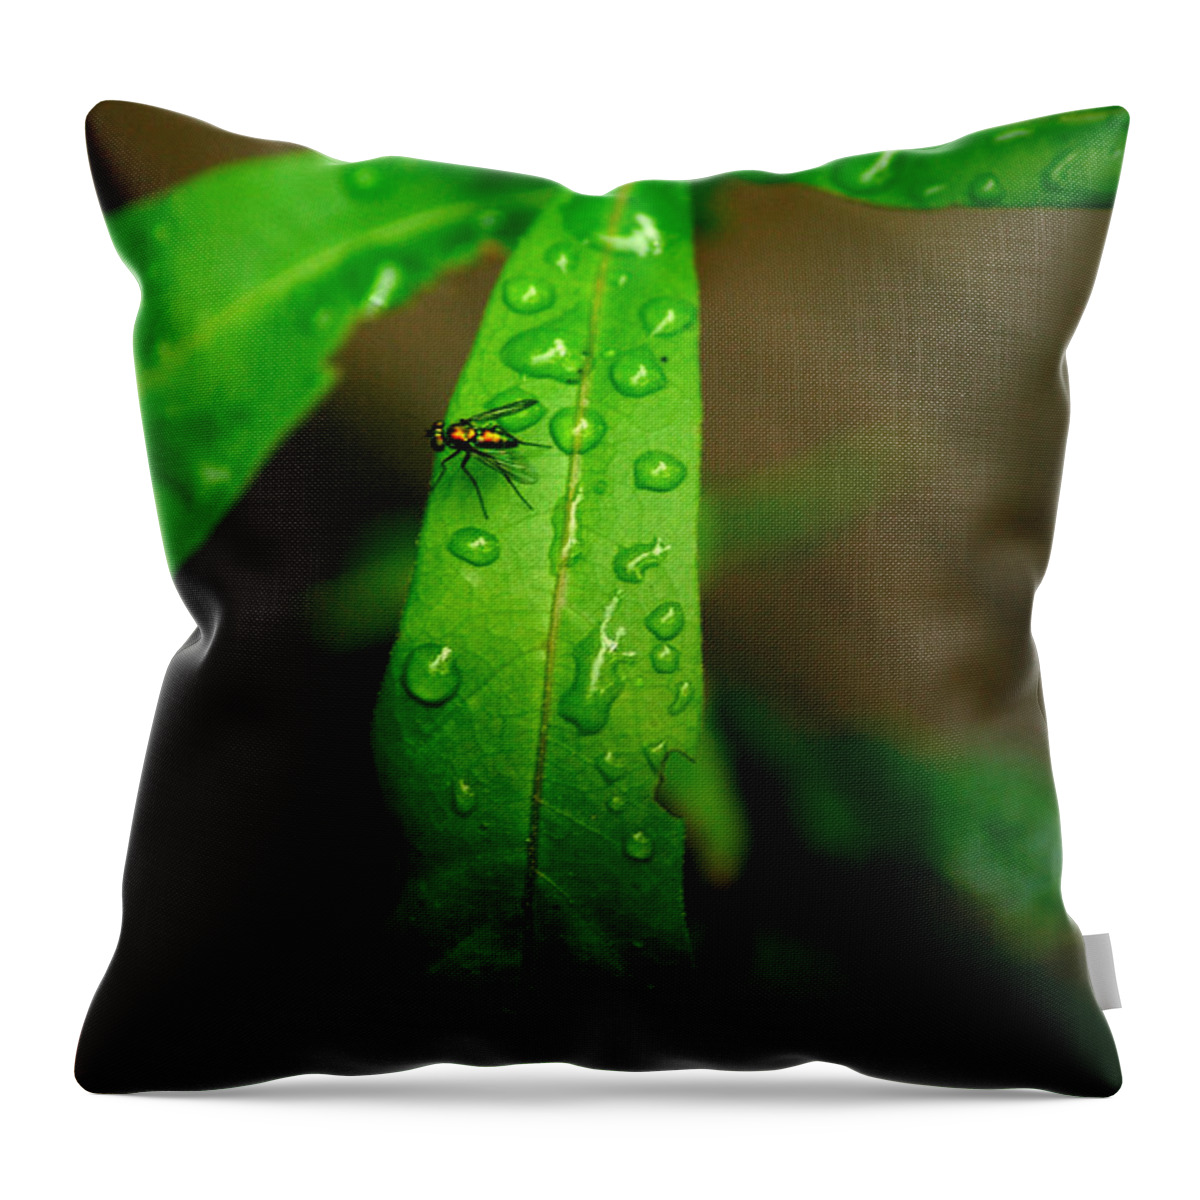 Leaf Throw Pillow featuring the photograph Rain by David Weeks